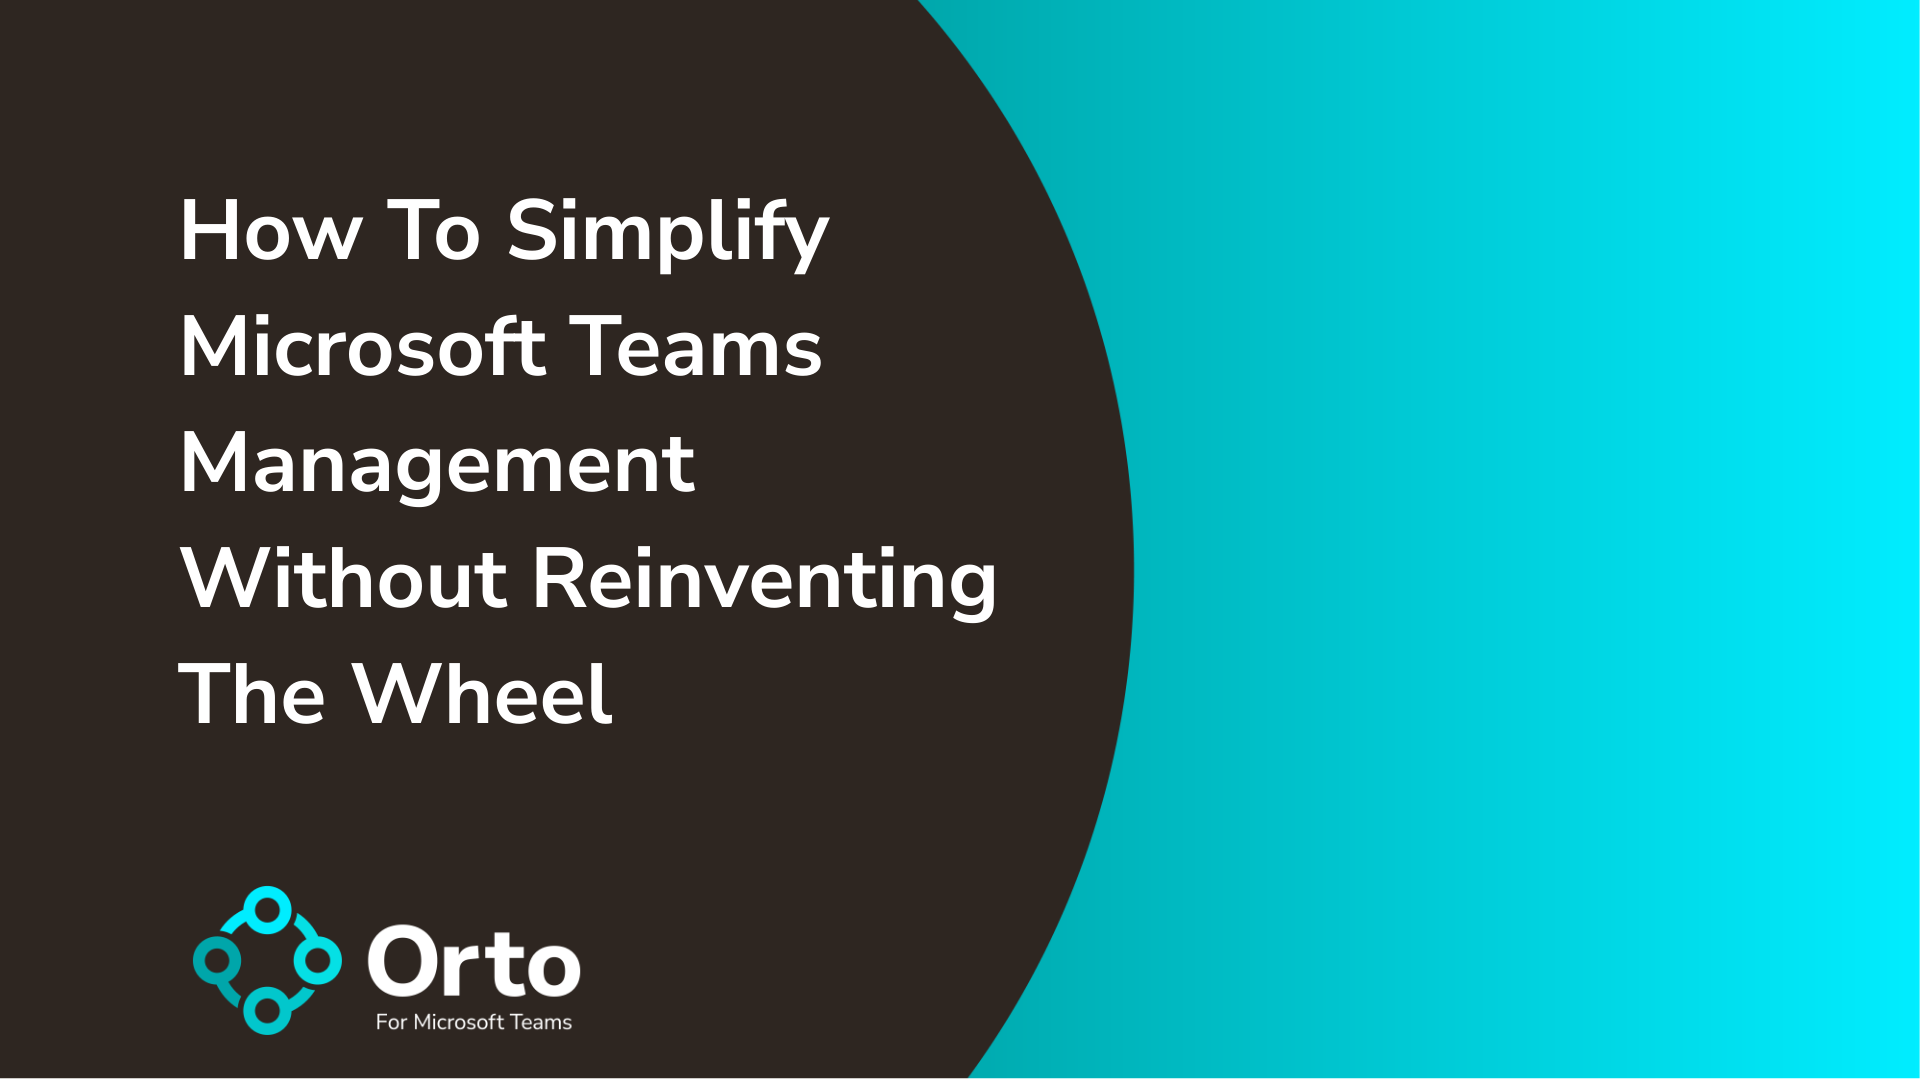 How To Simplify Microsoft Teams Management Without Reinventing The Wheel